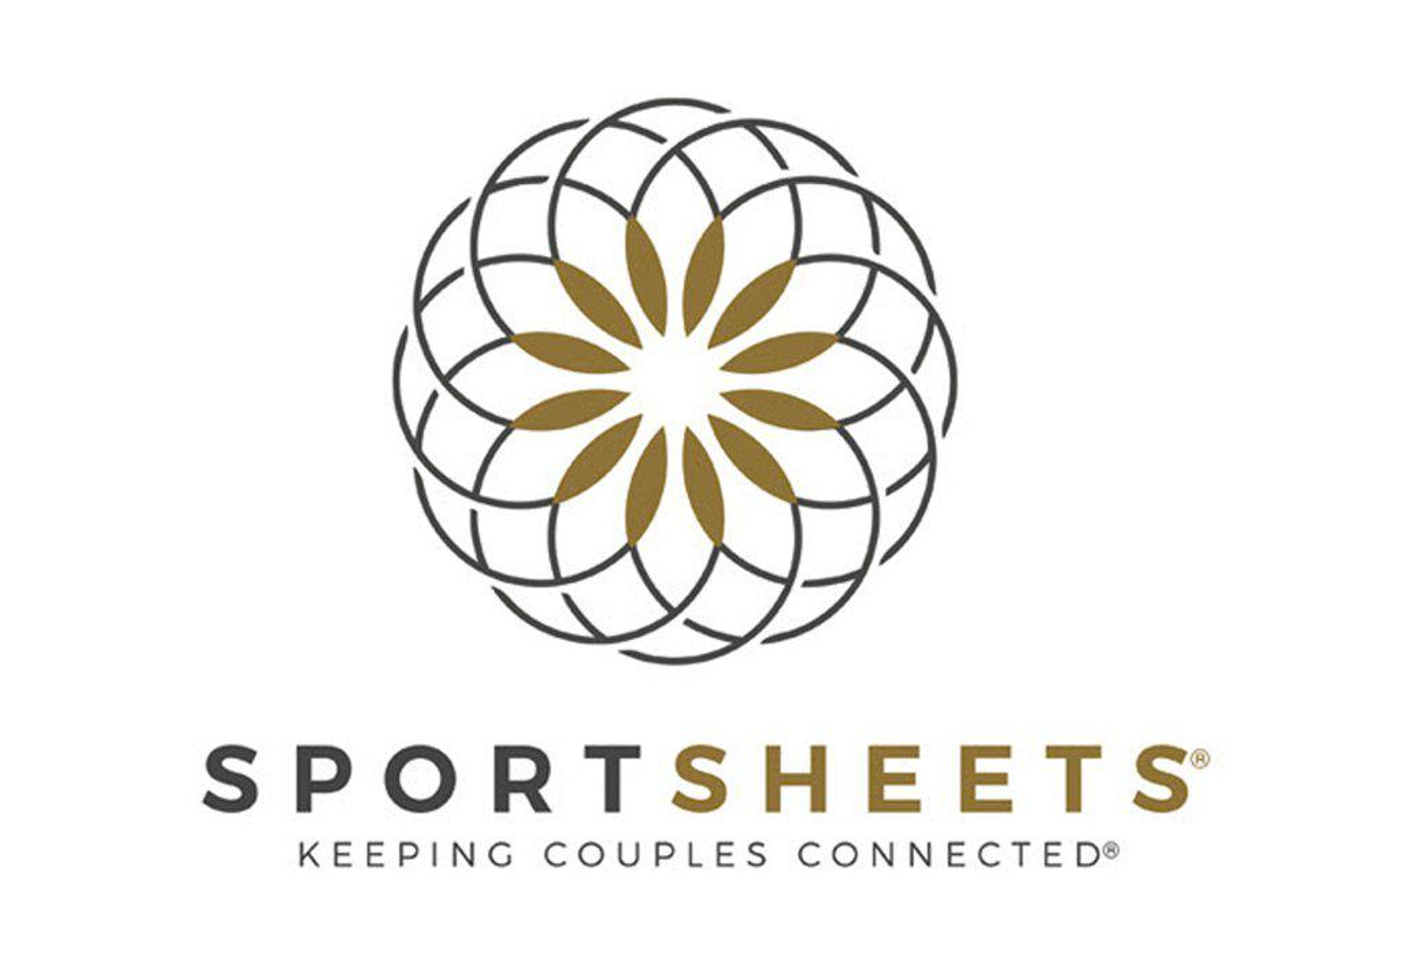 Sportsheets Deems August To Be Sex Ed Back To School Month